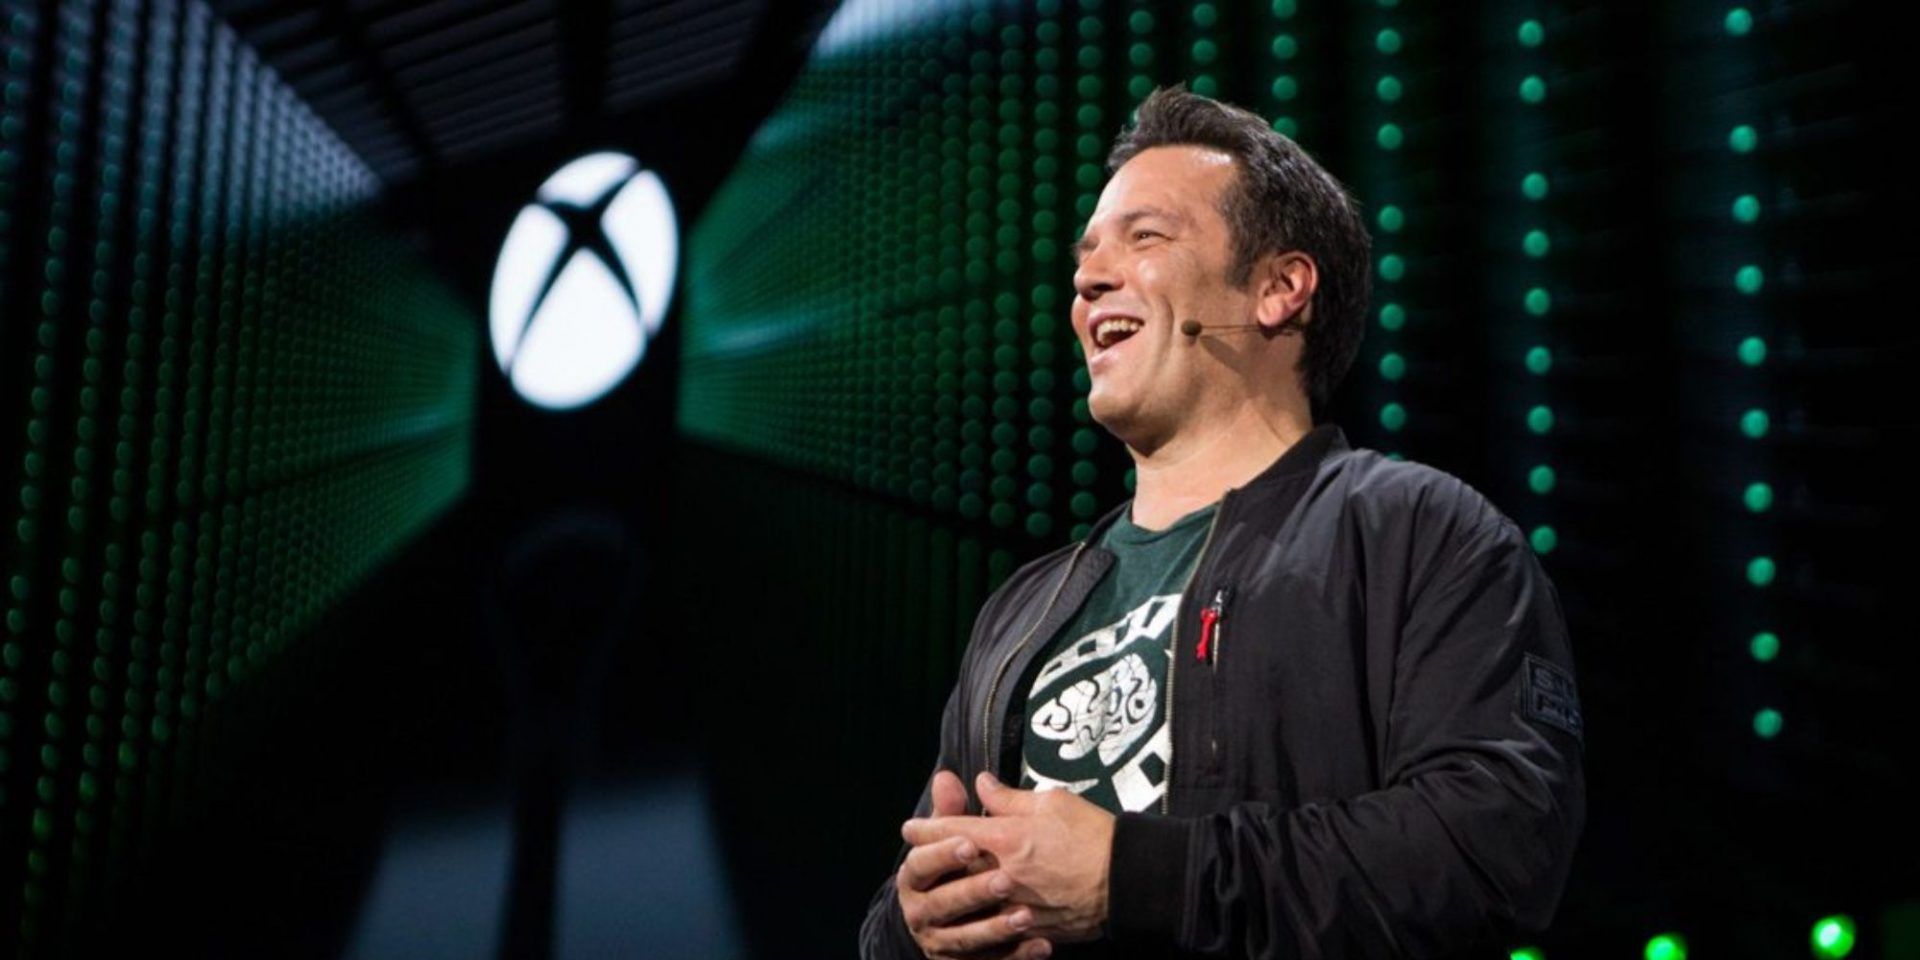 Microsoft Gaming CEO Phil Spencer shows joy during a presentation